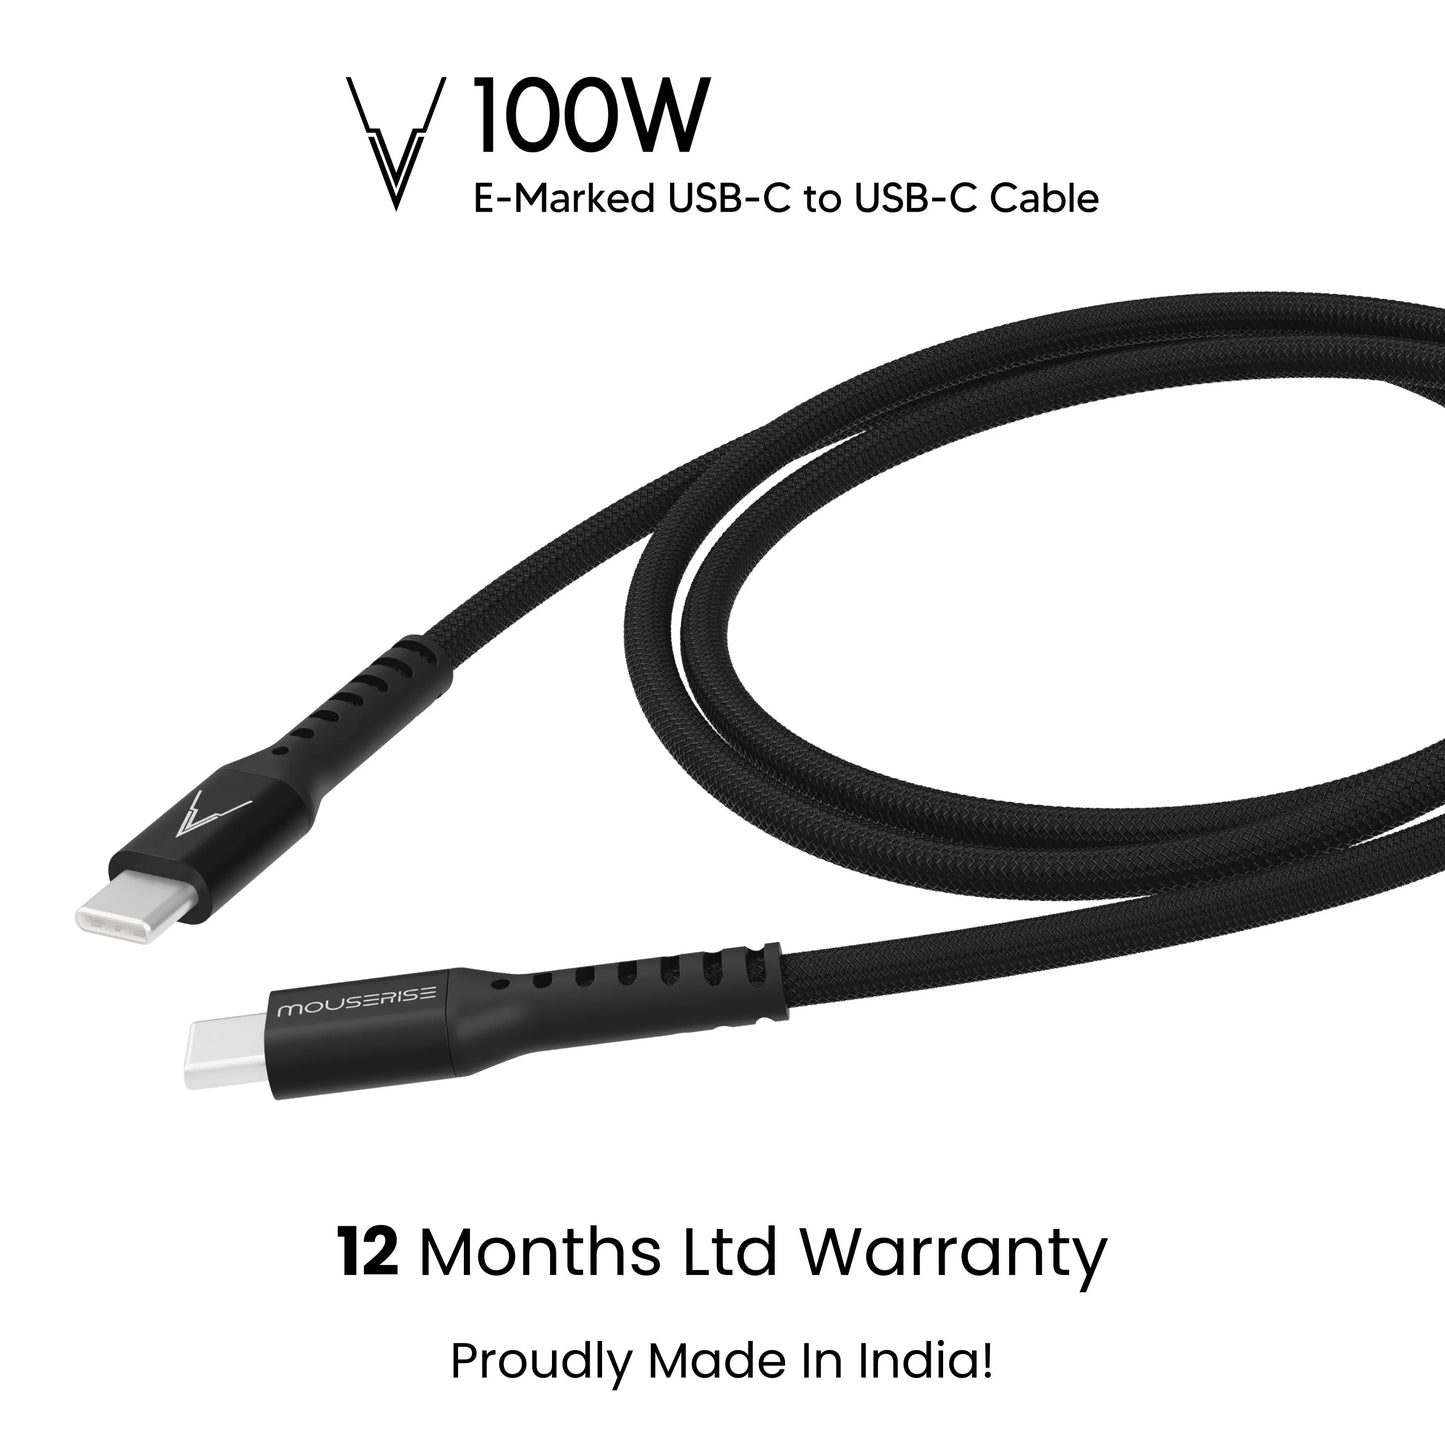 Velocity 100W E-Marked USB-C to USB-C Cable